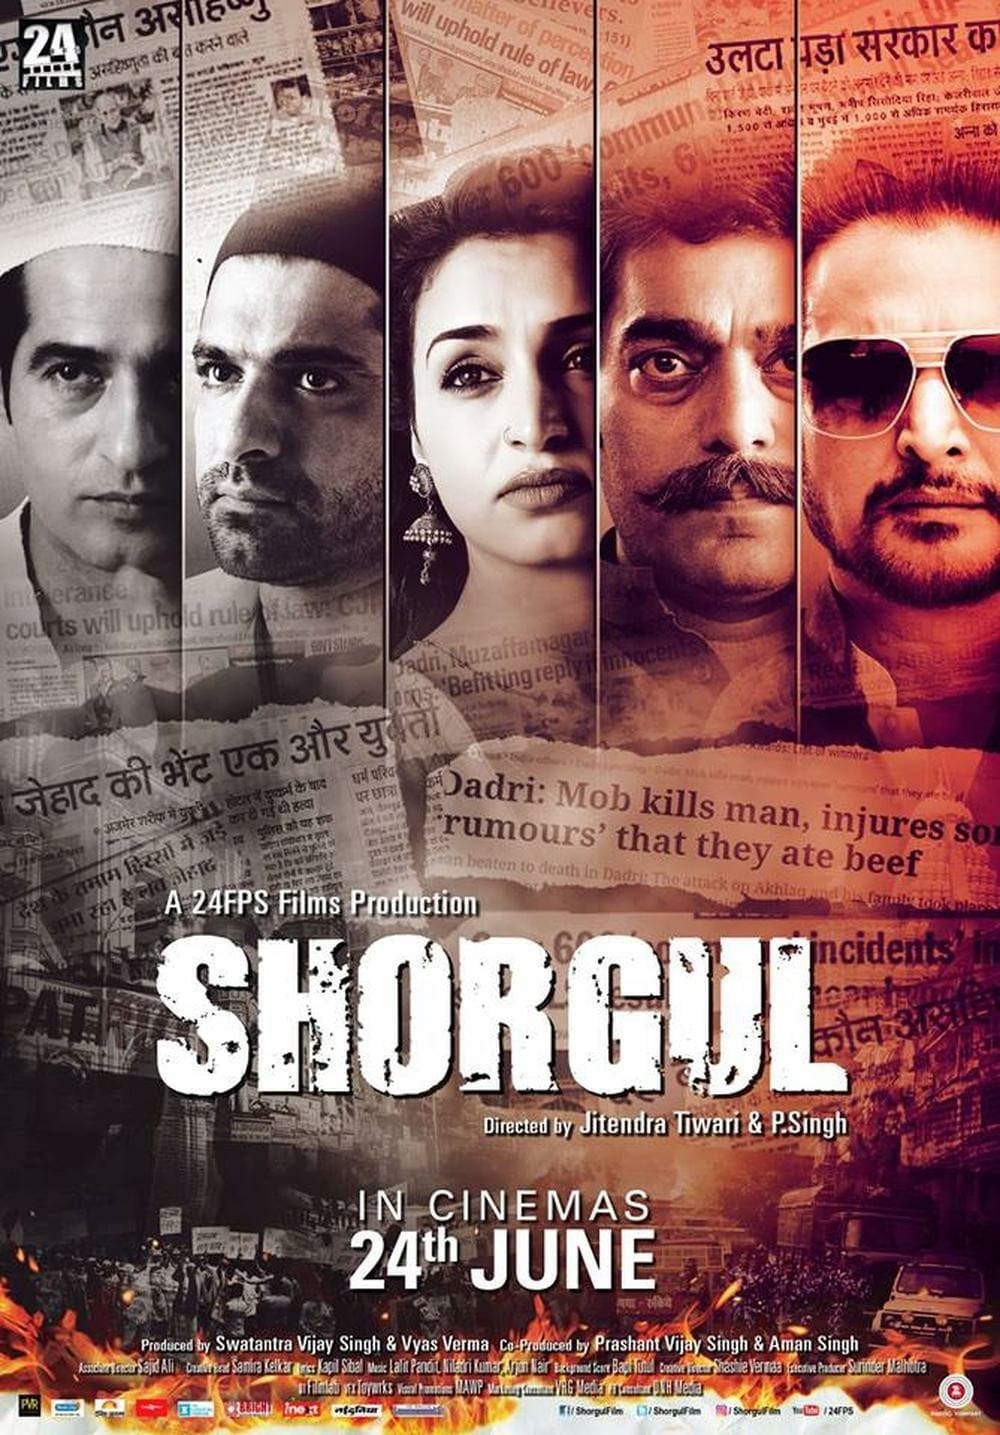 Poster for the movie "Shorgul"